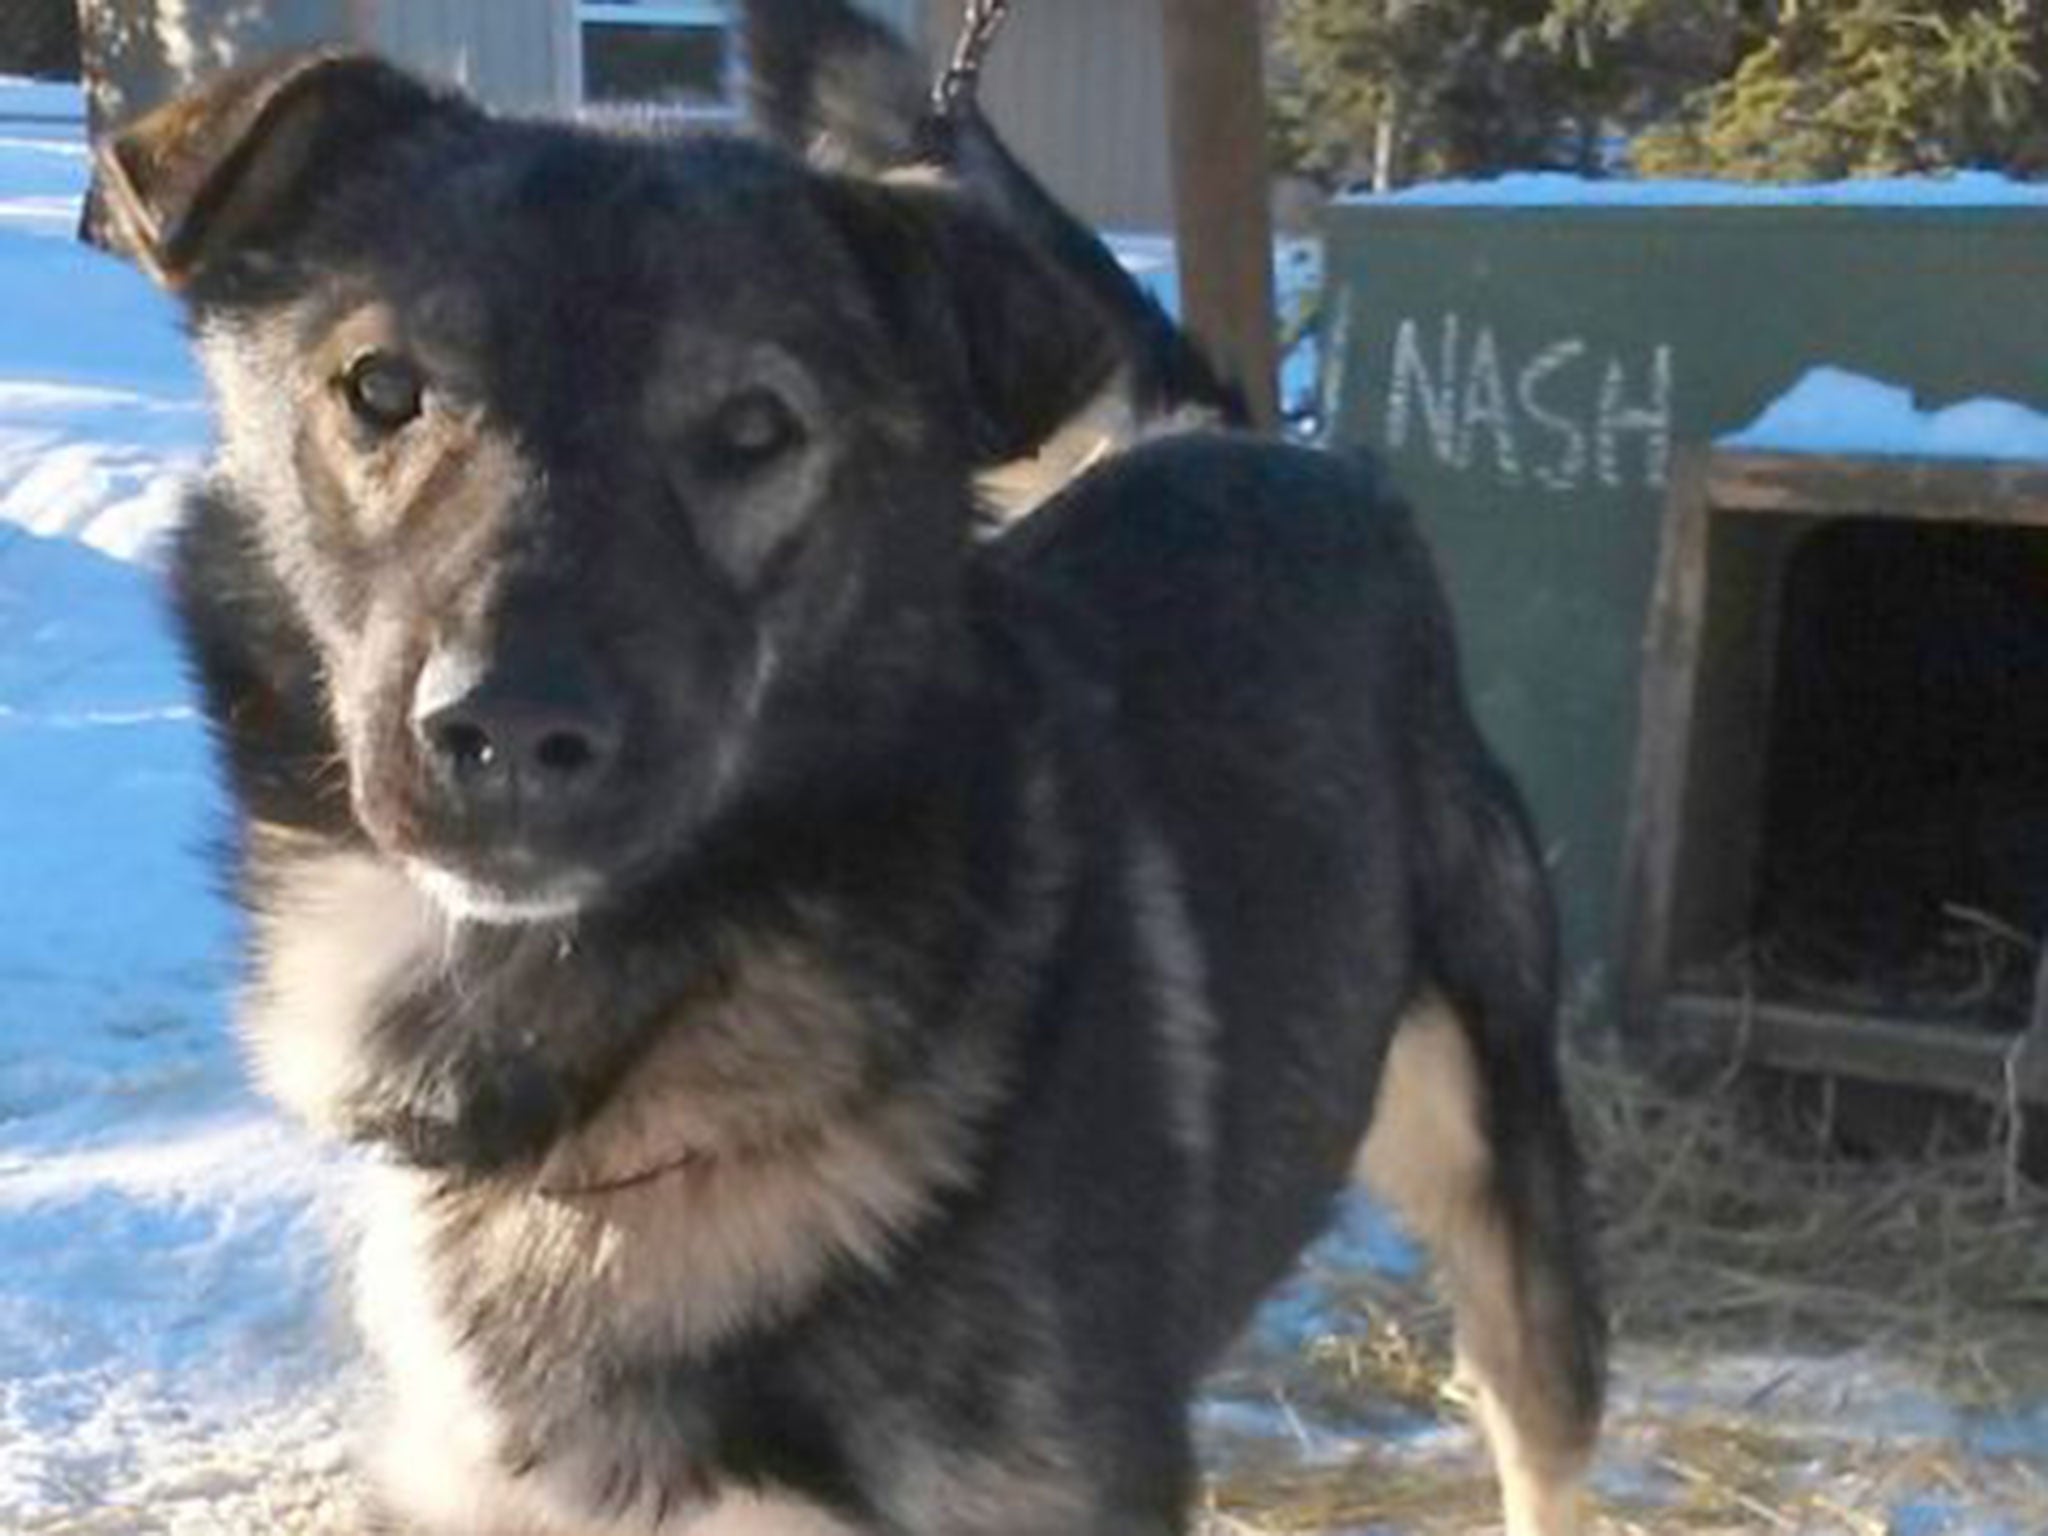 3-year-old dog Nash, pictured, was killed in the collision and a number of other dogs were reportedly injured